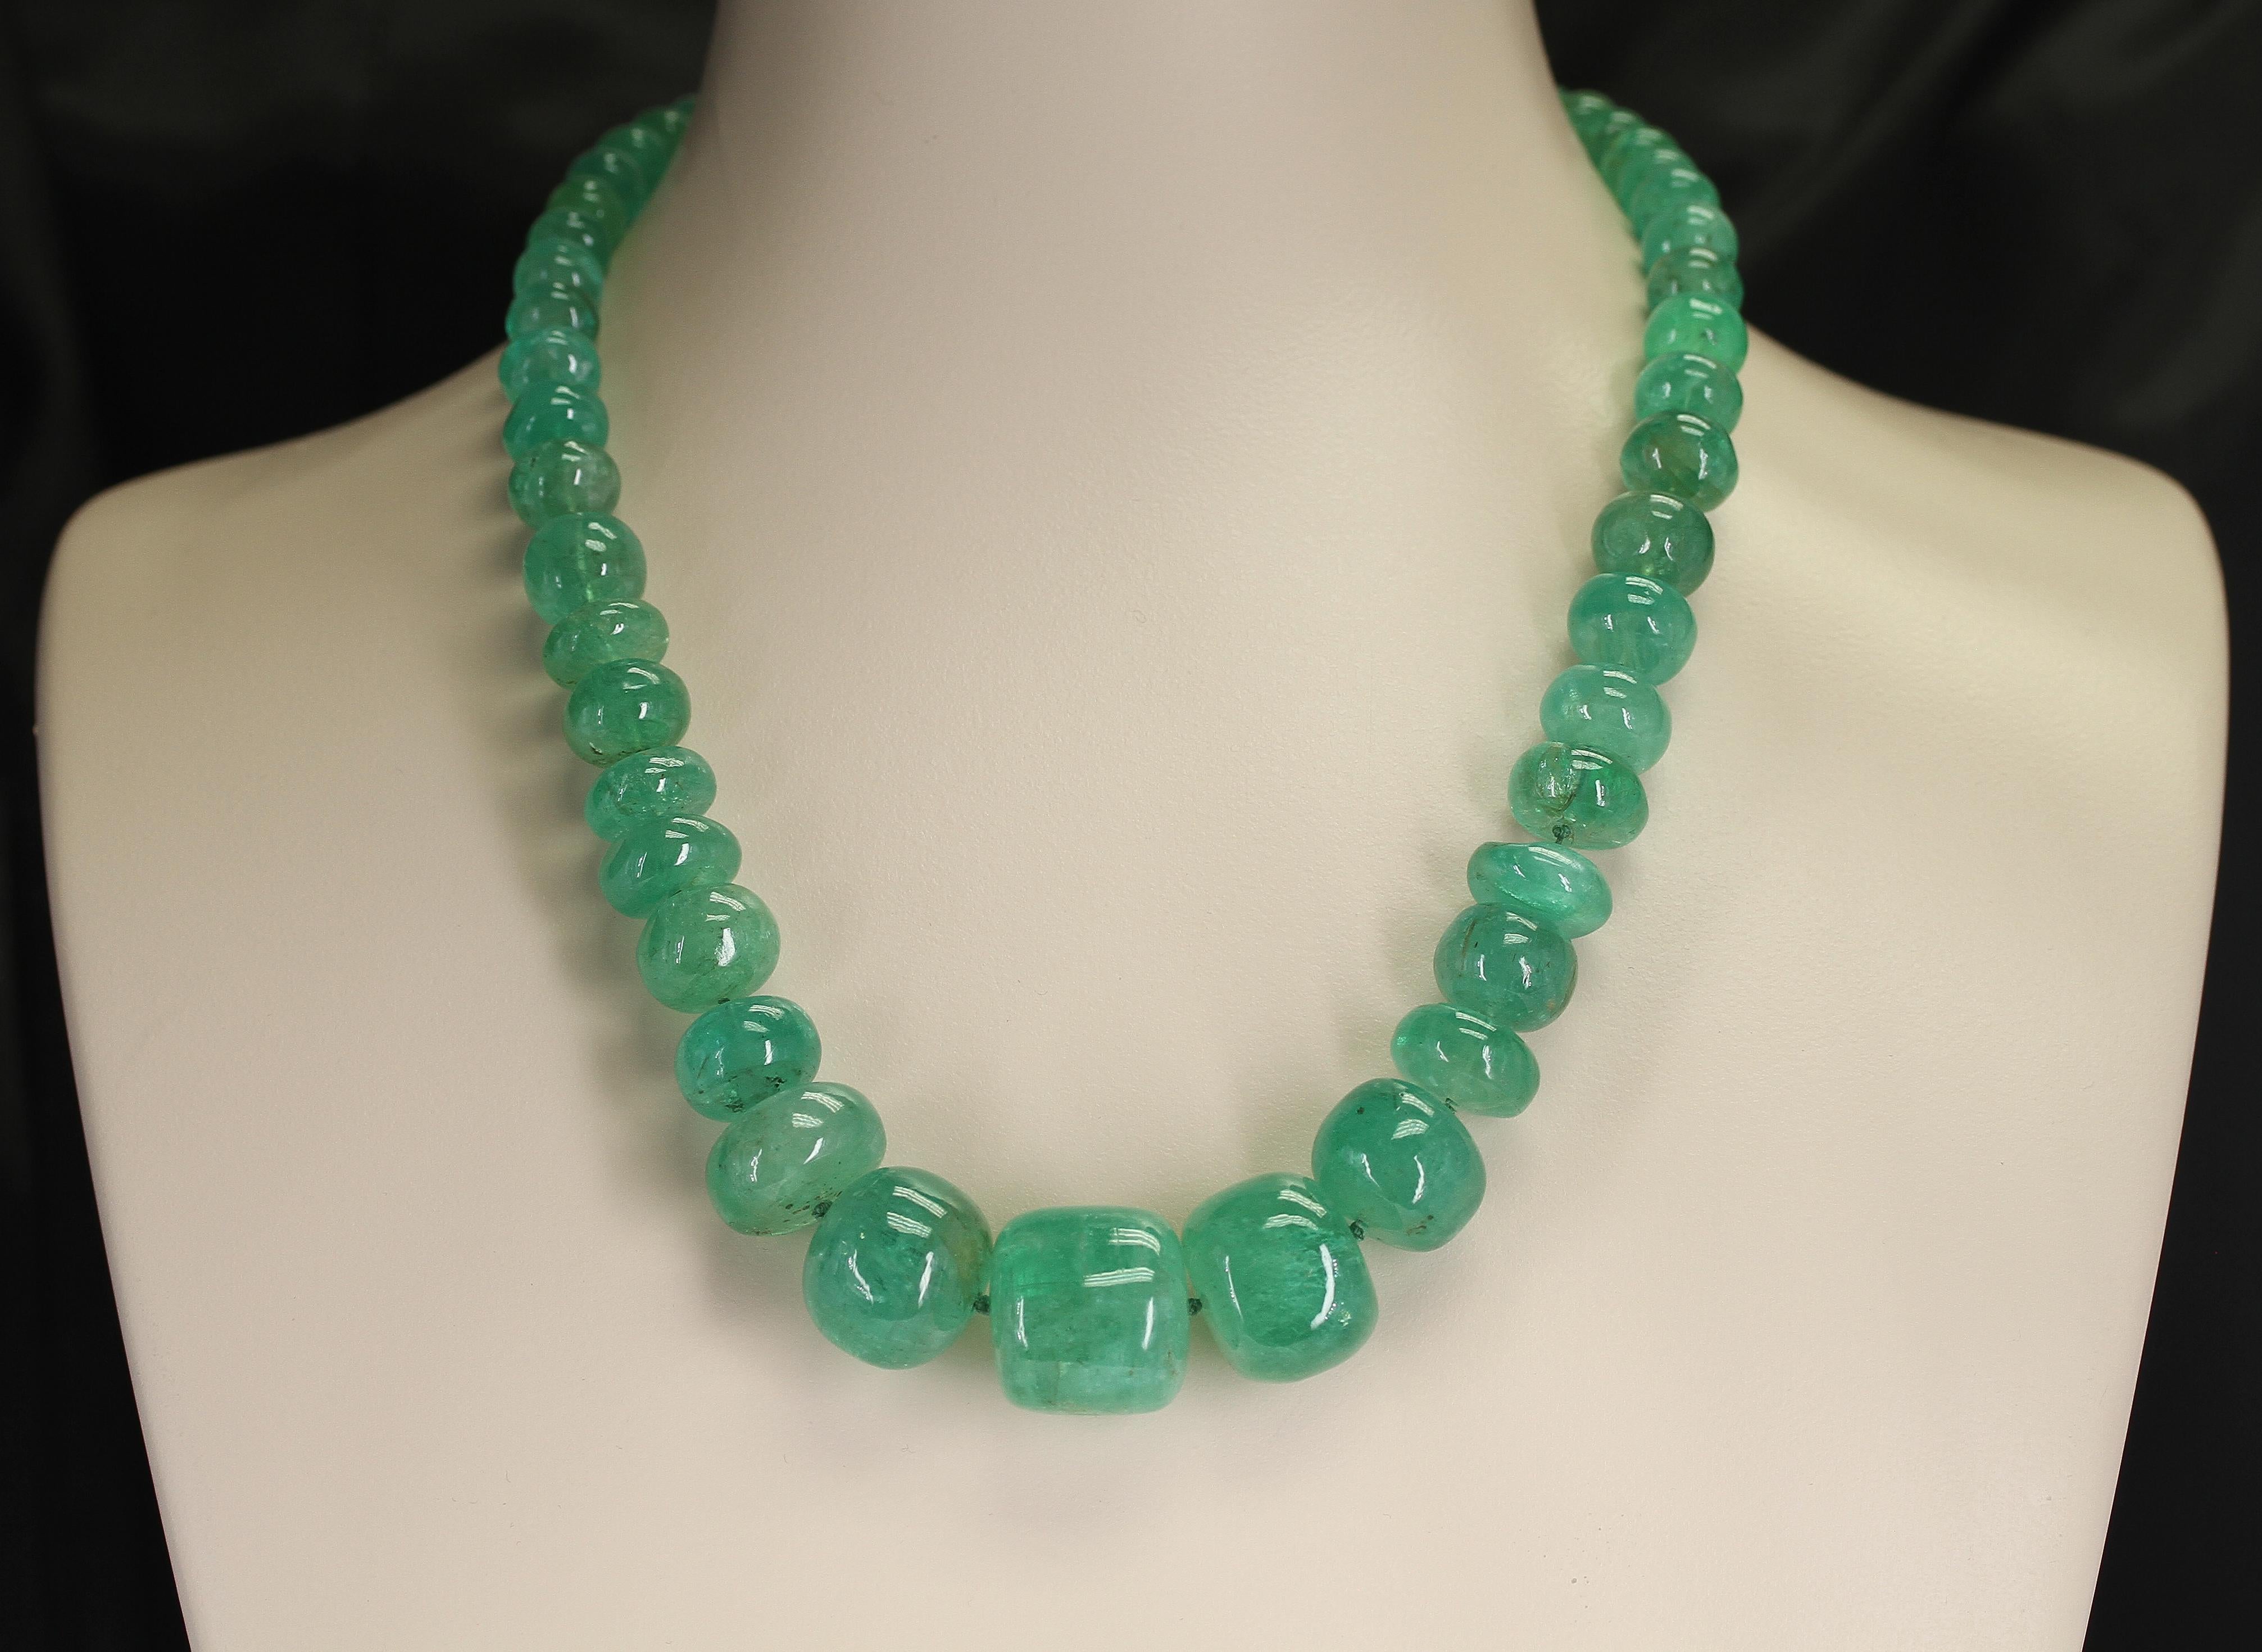 A magnificent Genuine & Natural Large Emerald Tumbled Beads Necklace with a Pearl Clasp. The beads range from 9MM to 22MM and the length is 22.5.